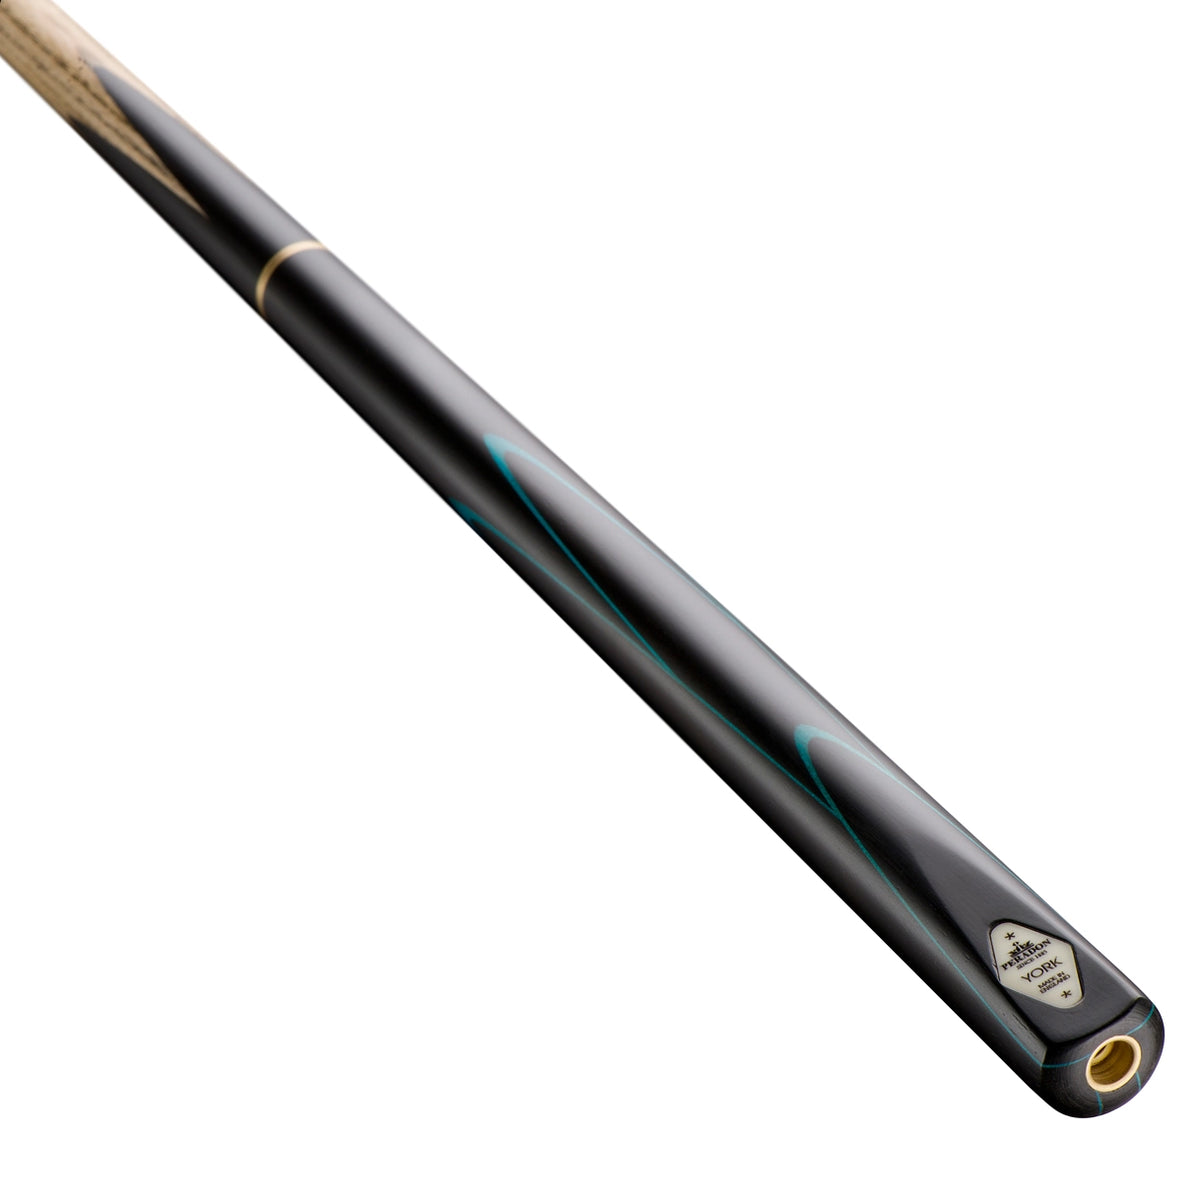 Peradon York 3/4 Jointed Snooker Cue. On angle